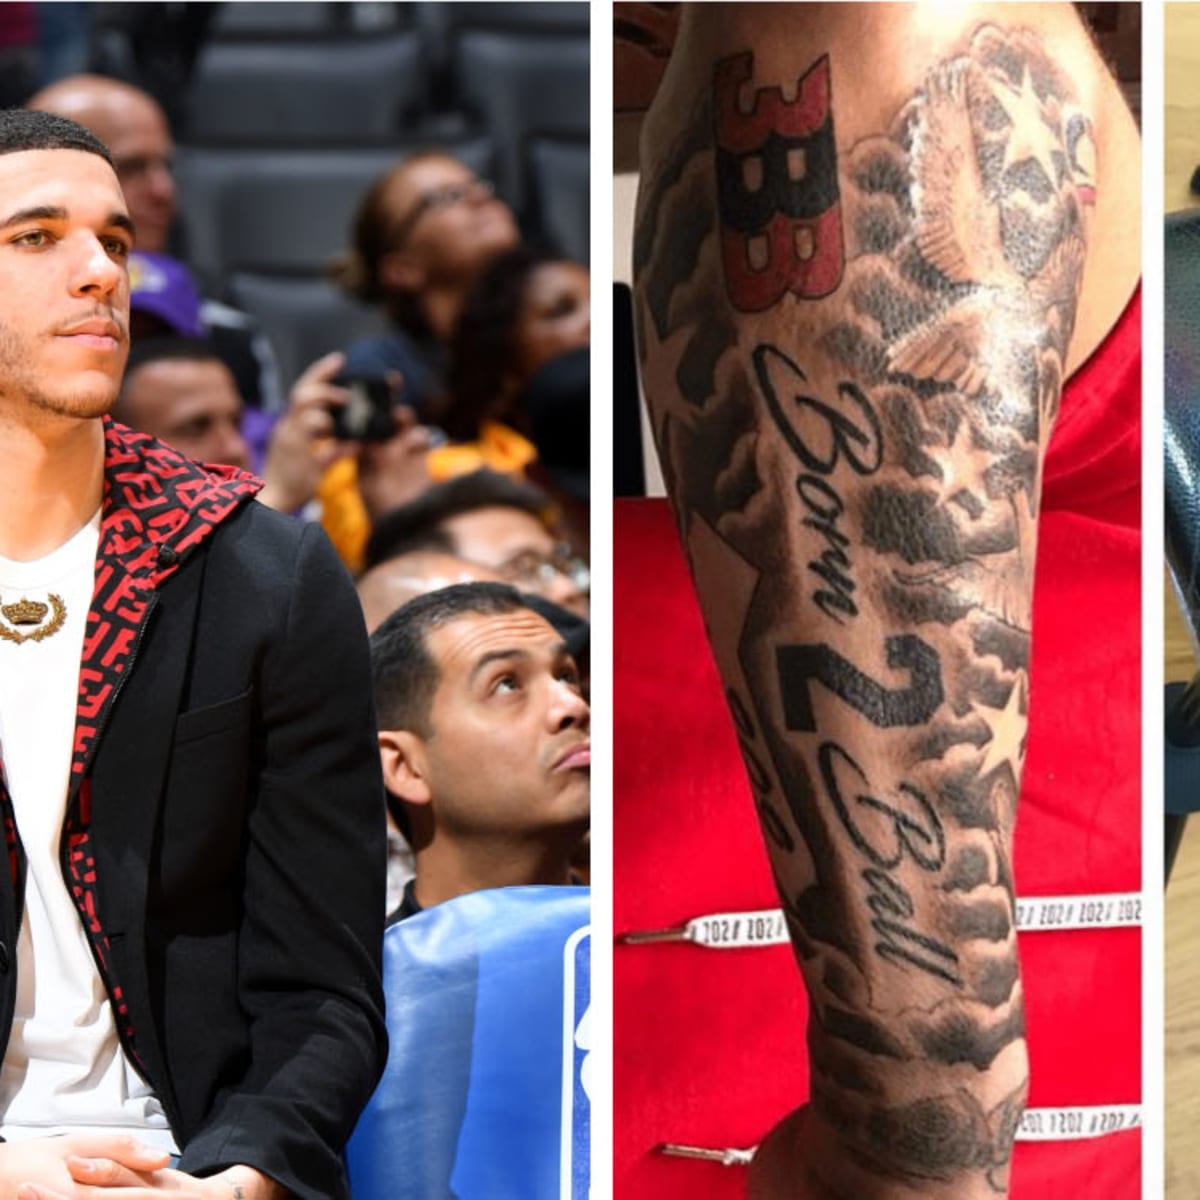 Lonzo Ball Has a New Tattoo Is he Signing with Nike